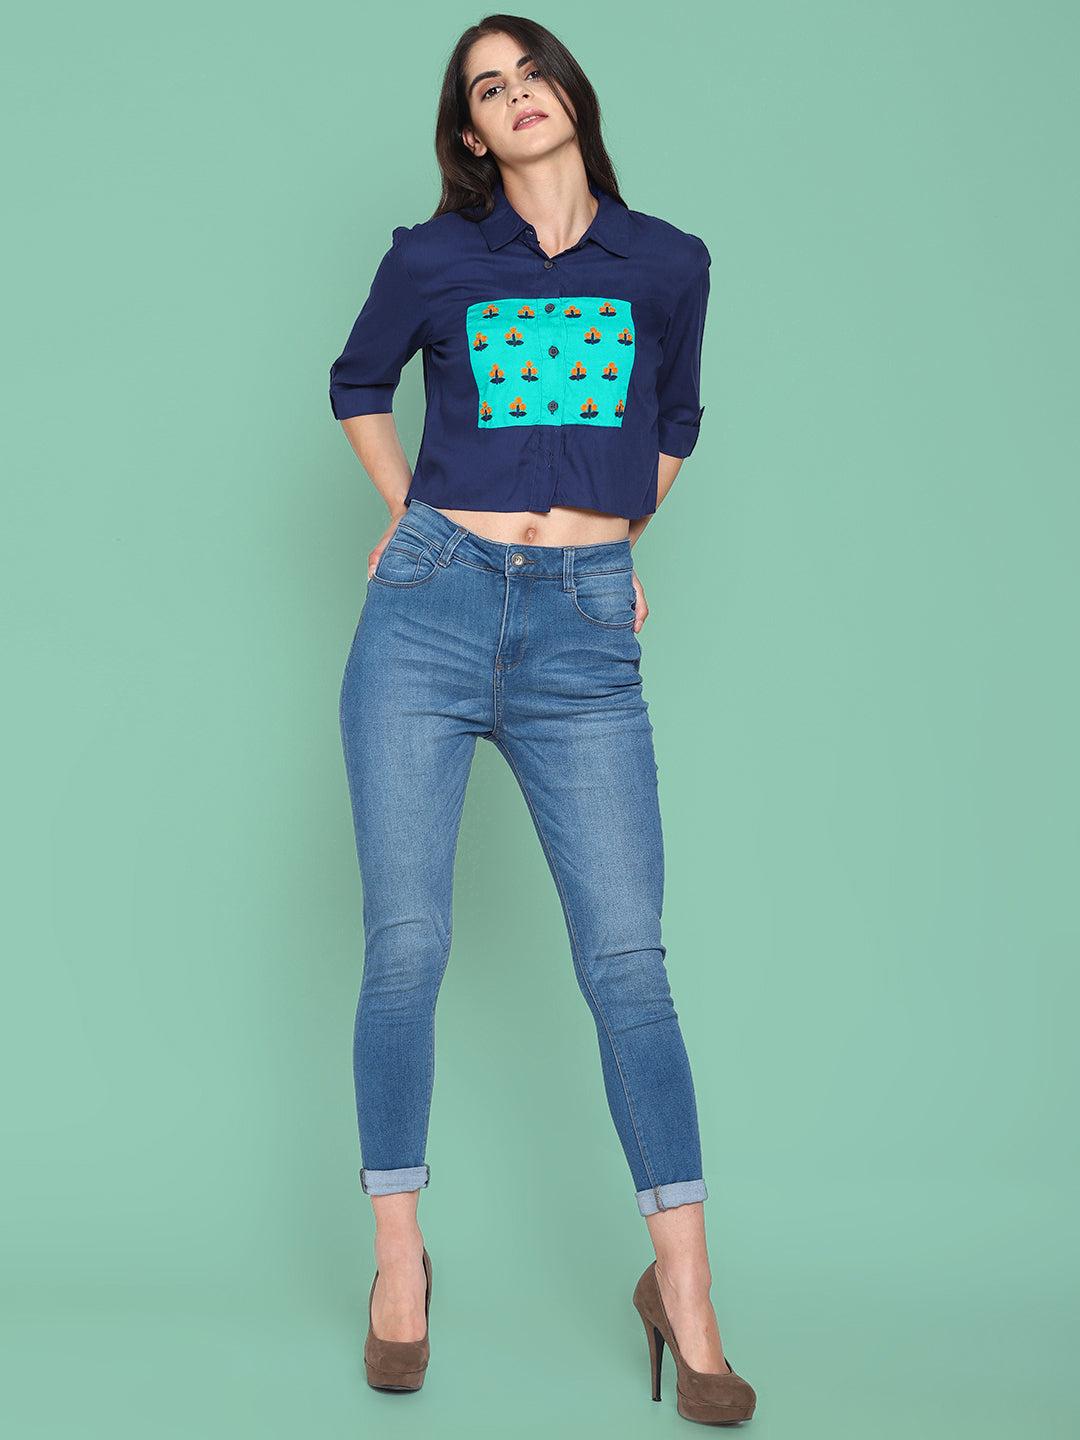 navy bluecolor block crop top with embroidery